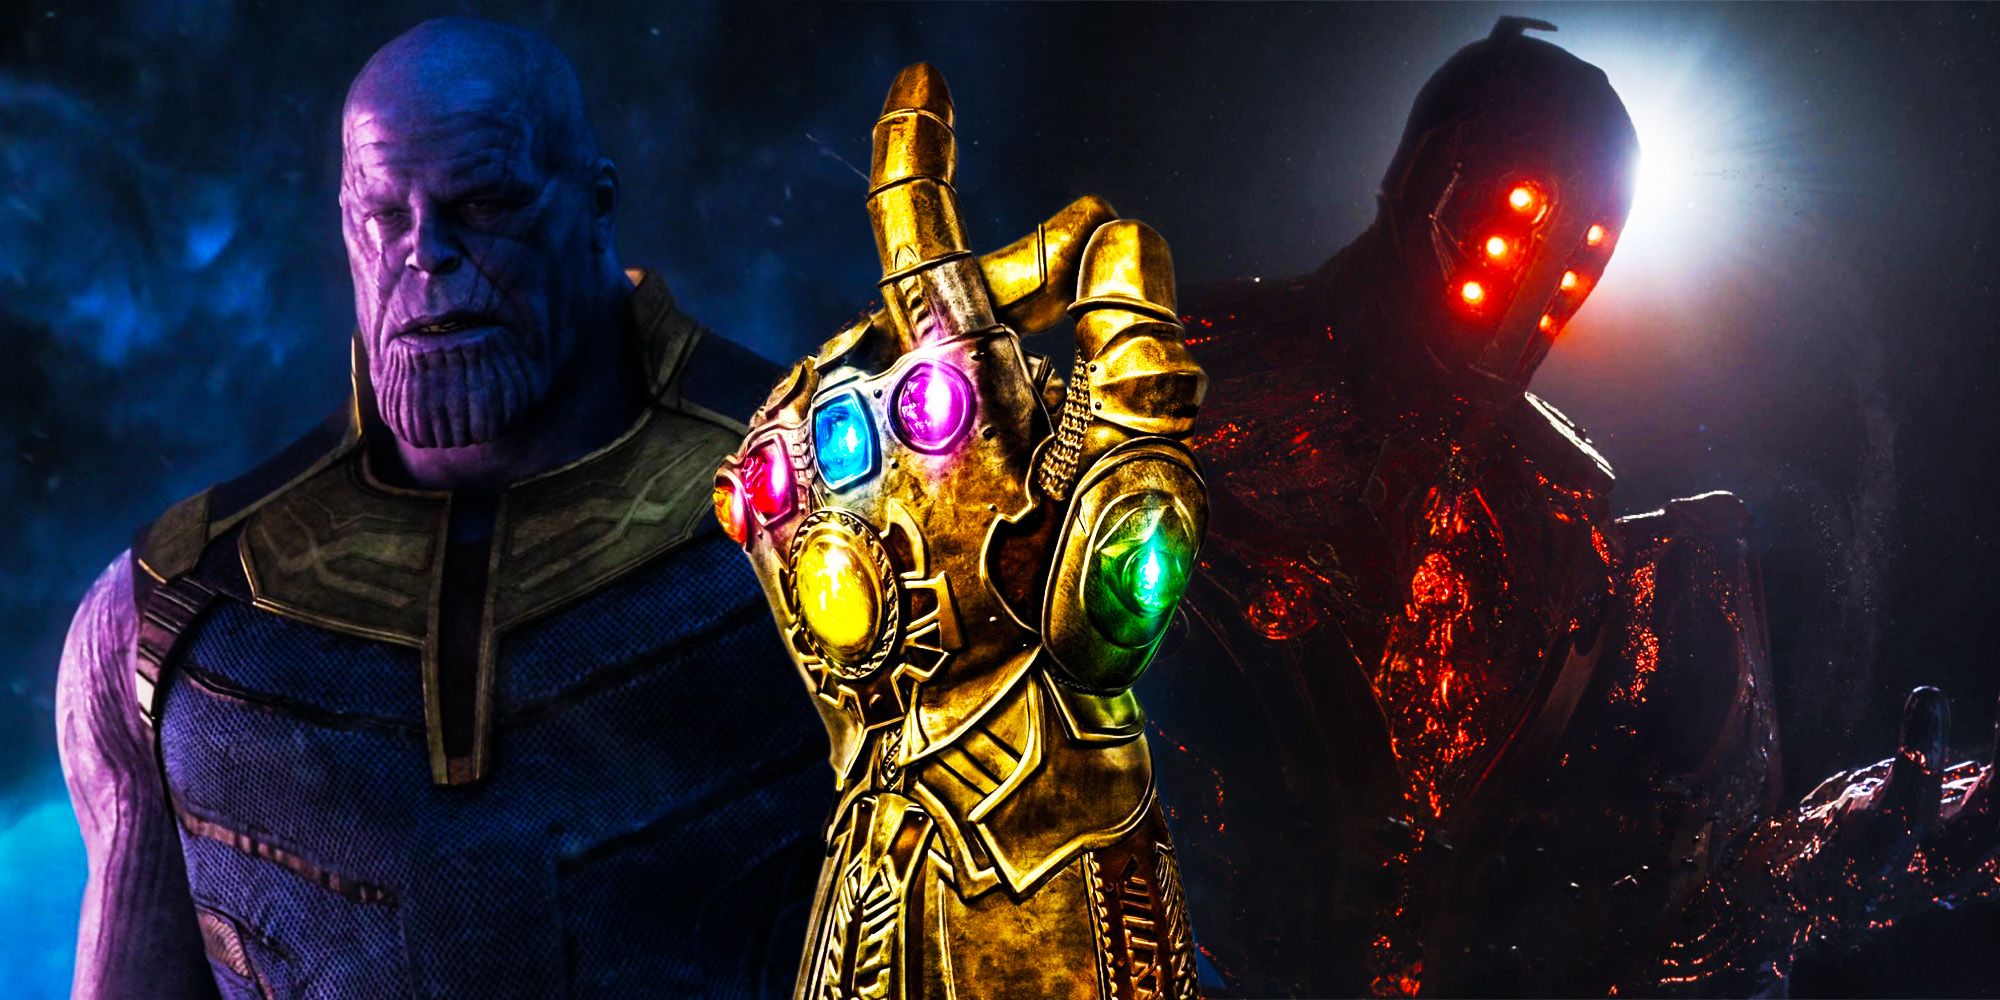 The Thanos snap for real: Let's remove humans from half of Earth